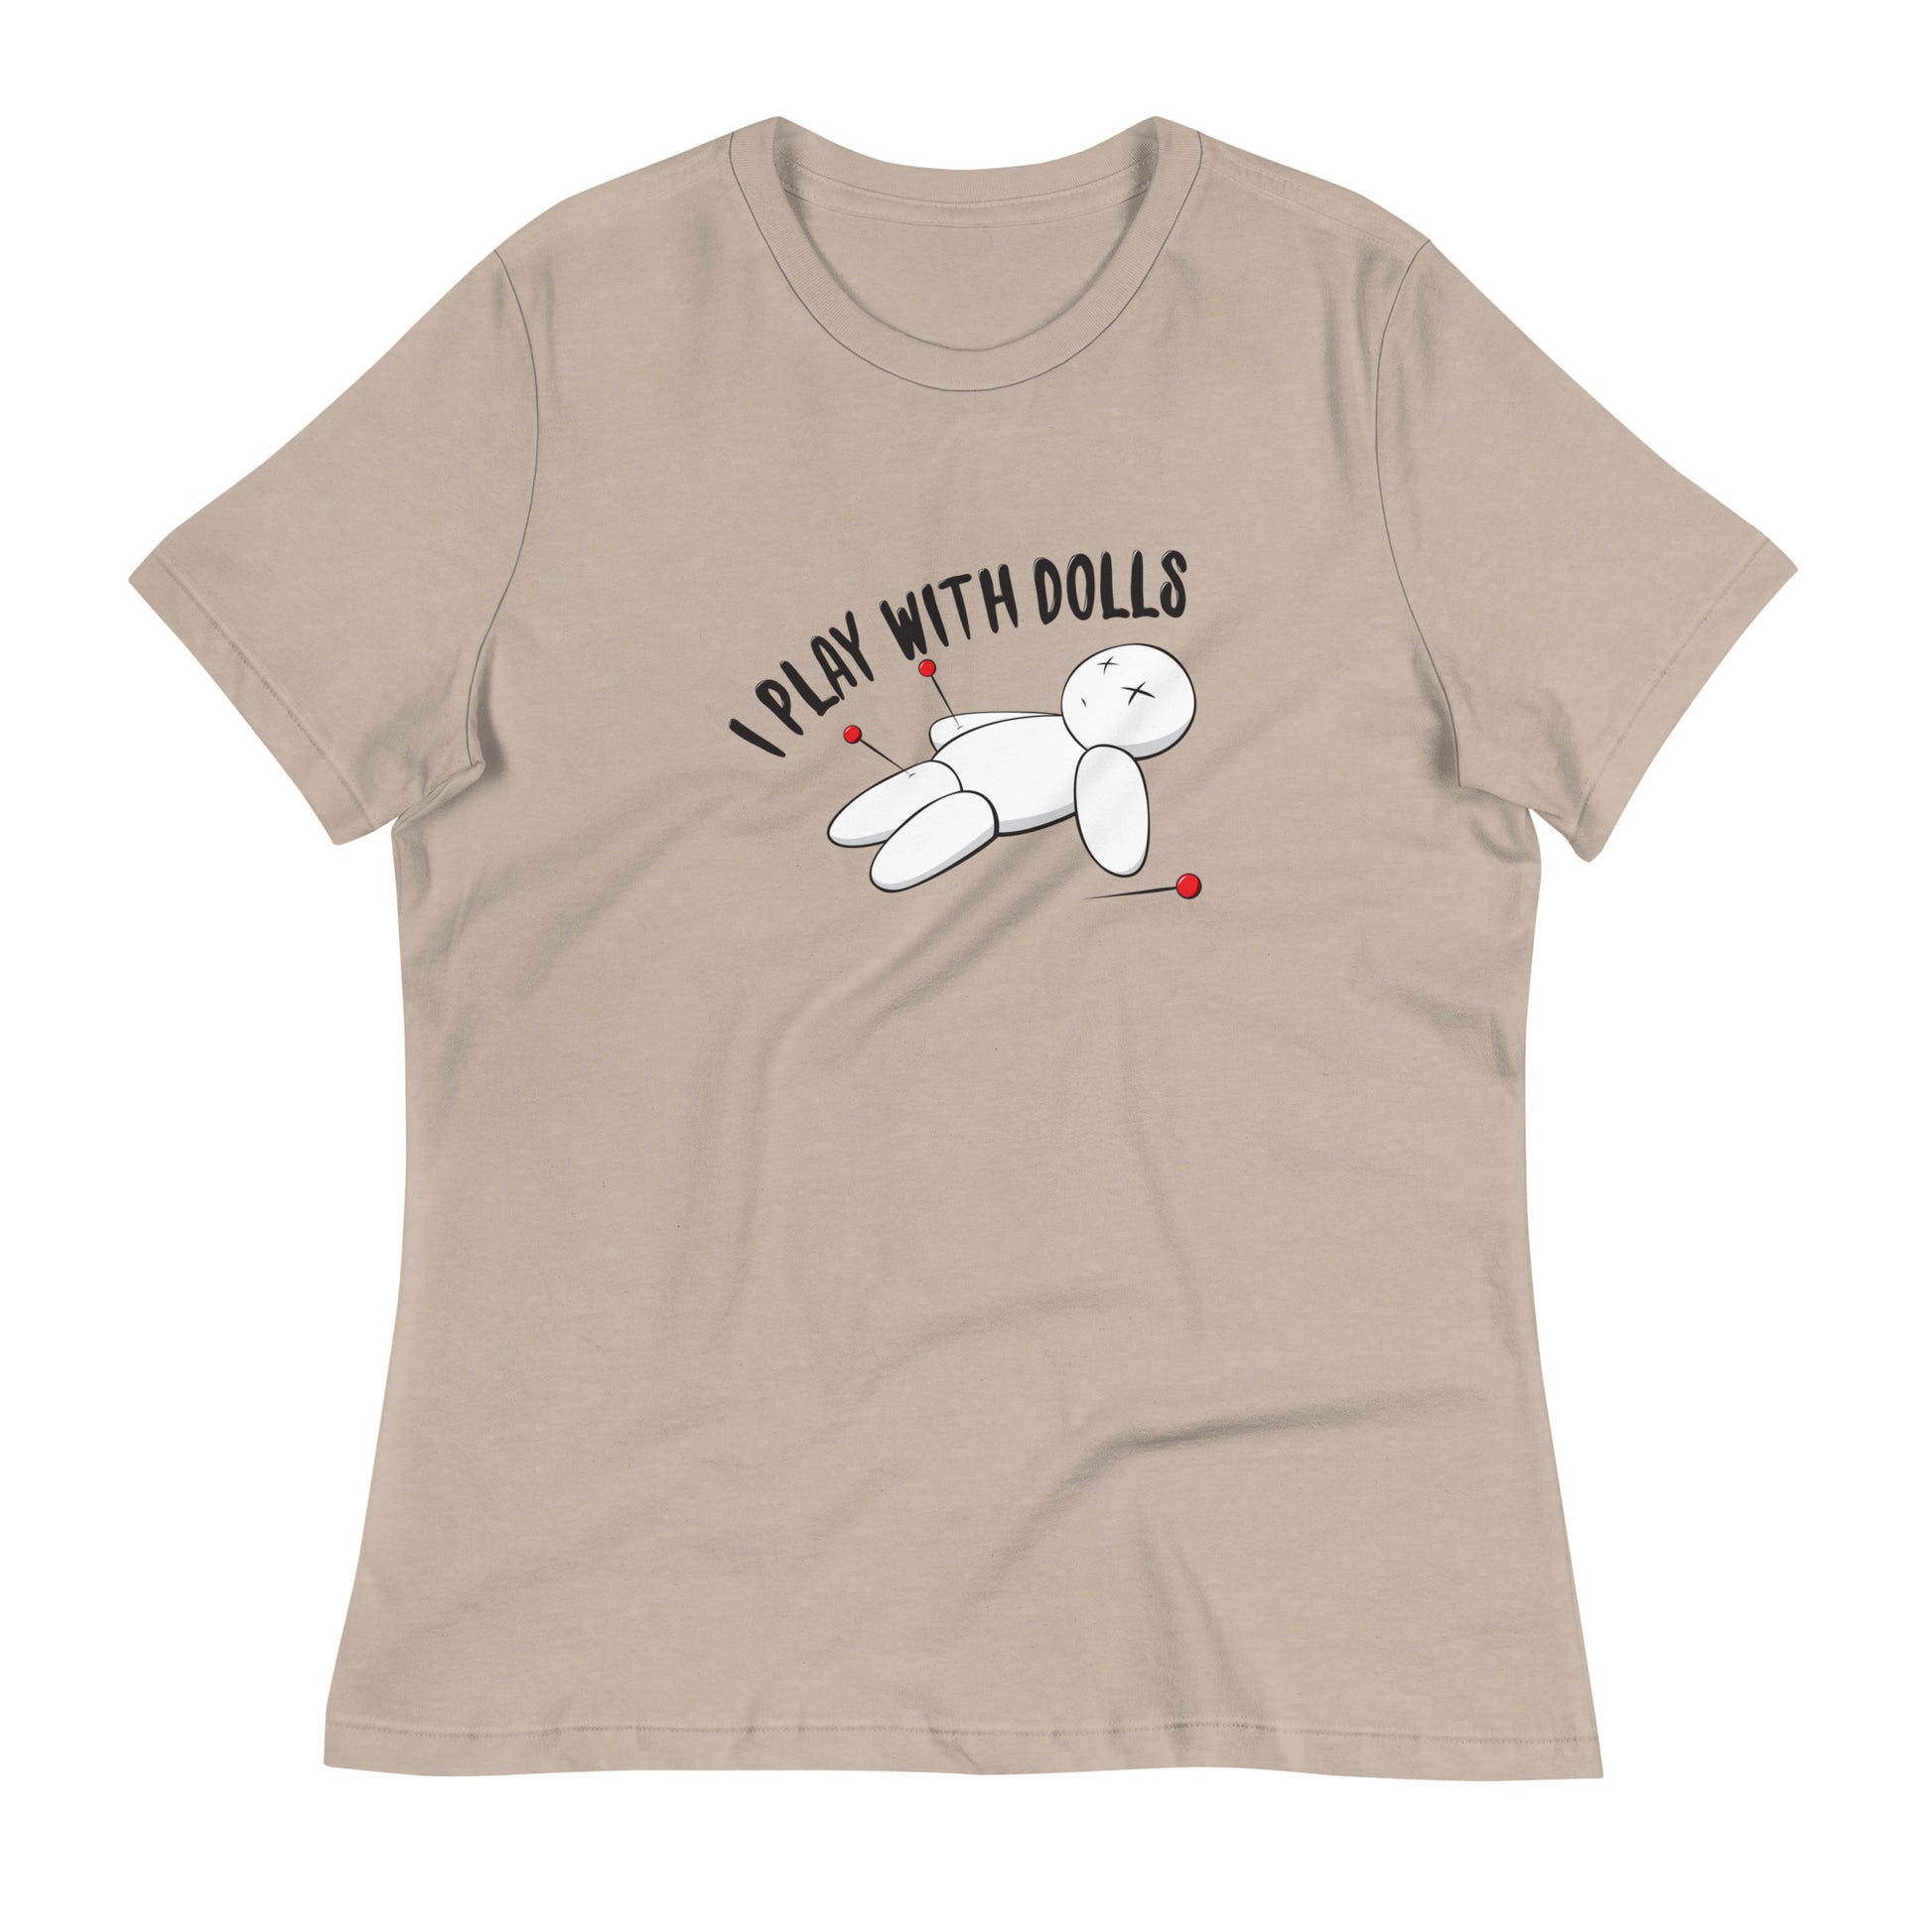 Heather Stone (tan) women's relaxed fit t-shirt with graphic of white voodoo doll with Xs for eyes stuck with several pins and text "I PLAY WITH DOLLS"